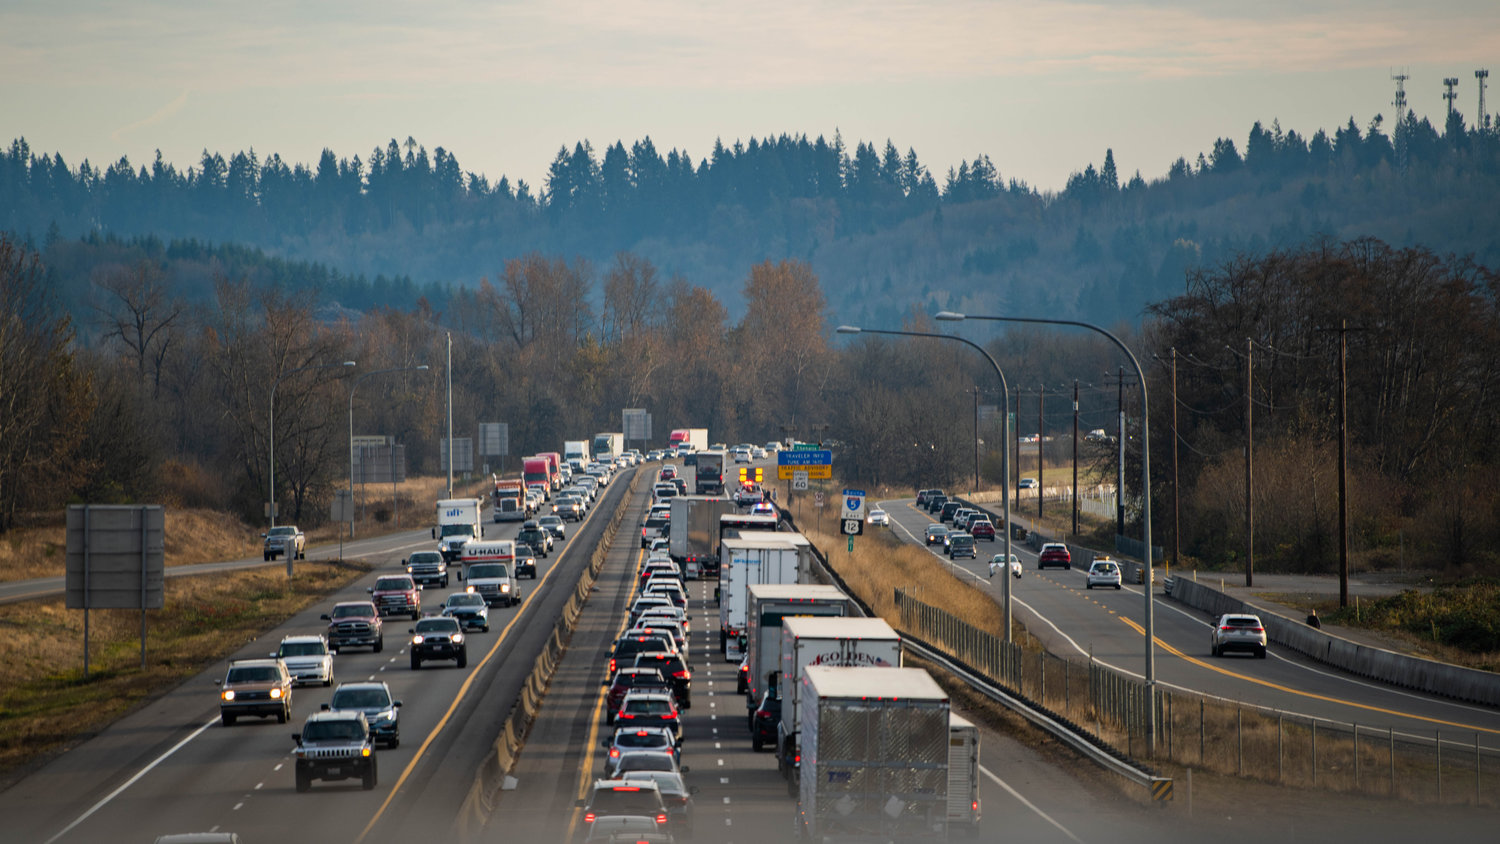 Traffic backs up along Interstate 5 in Centralia as WSDOT responds to the scene of a crash earlier this month.